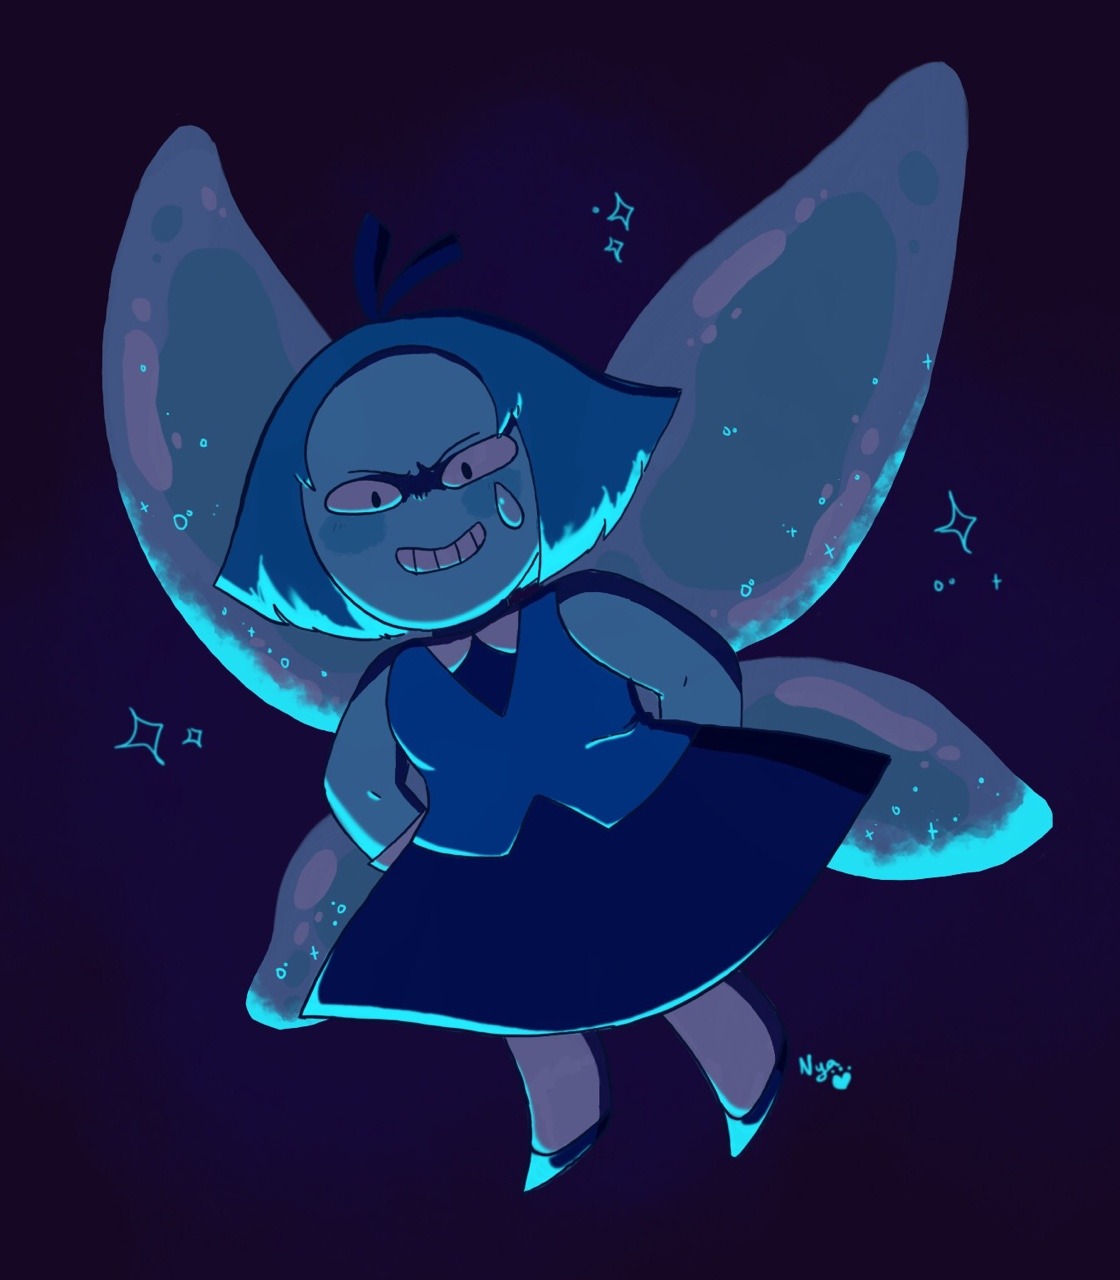 I couldn’t help myself, I had to draw the tiny blue bitch™ tbh she’s a great villain and very fun to draw, I had a lot of fun with this!